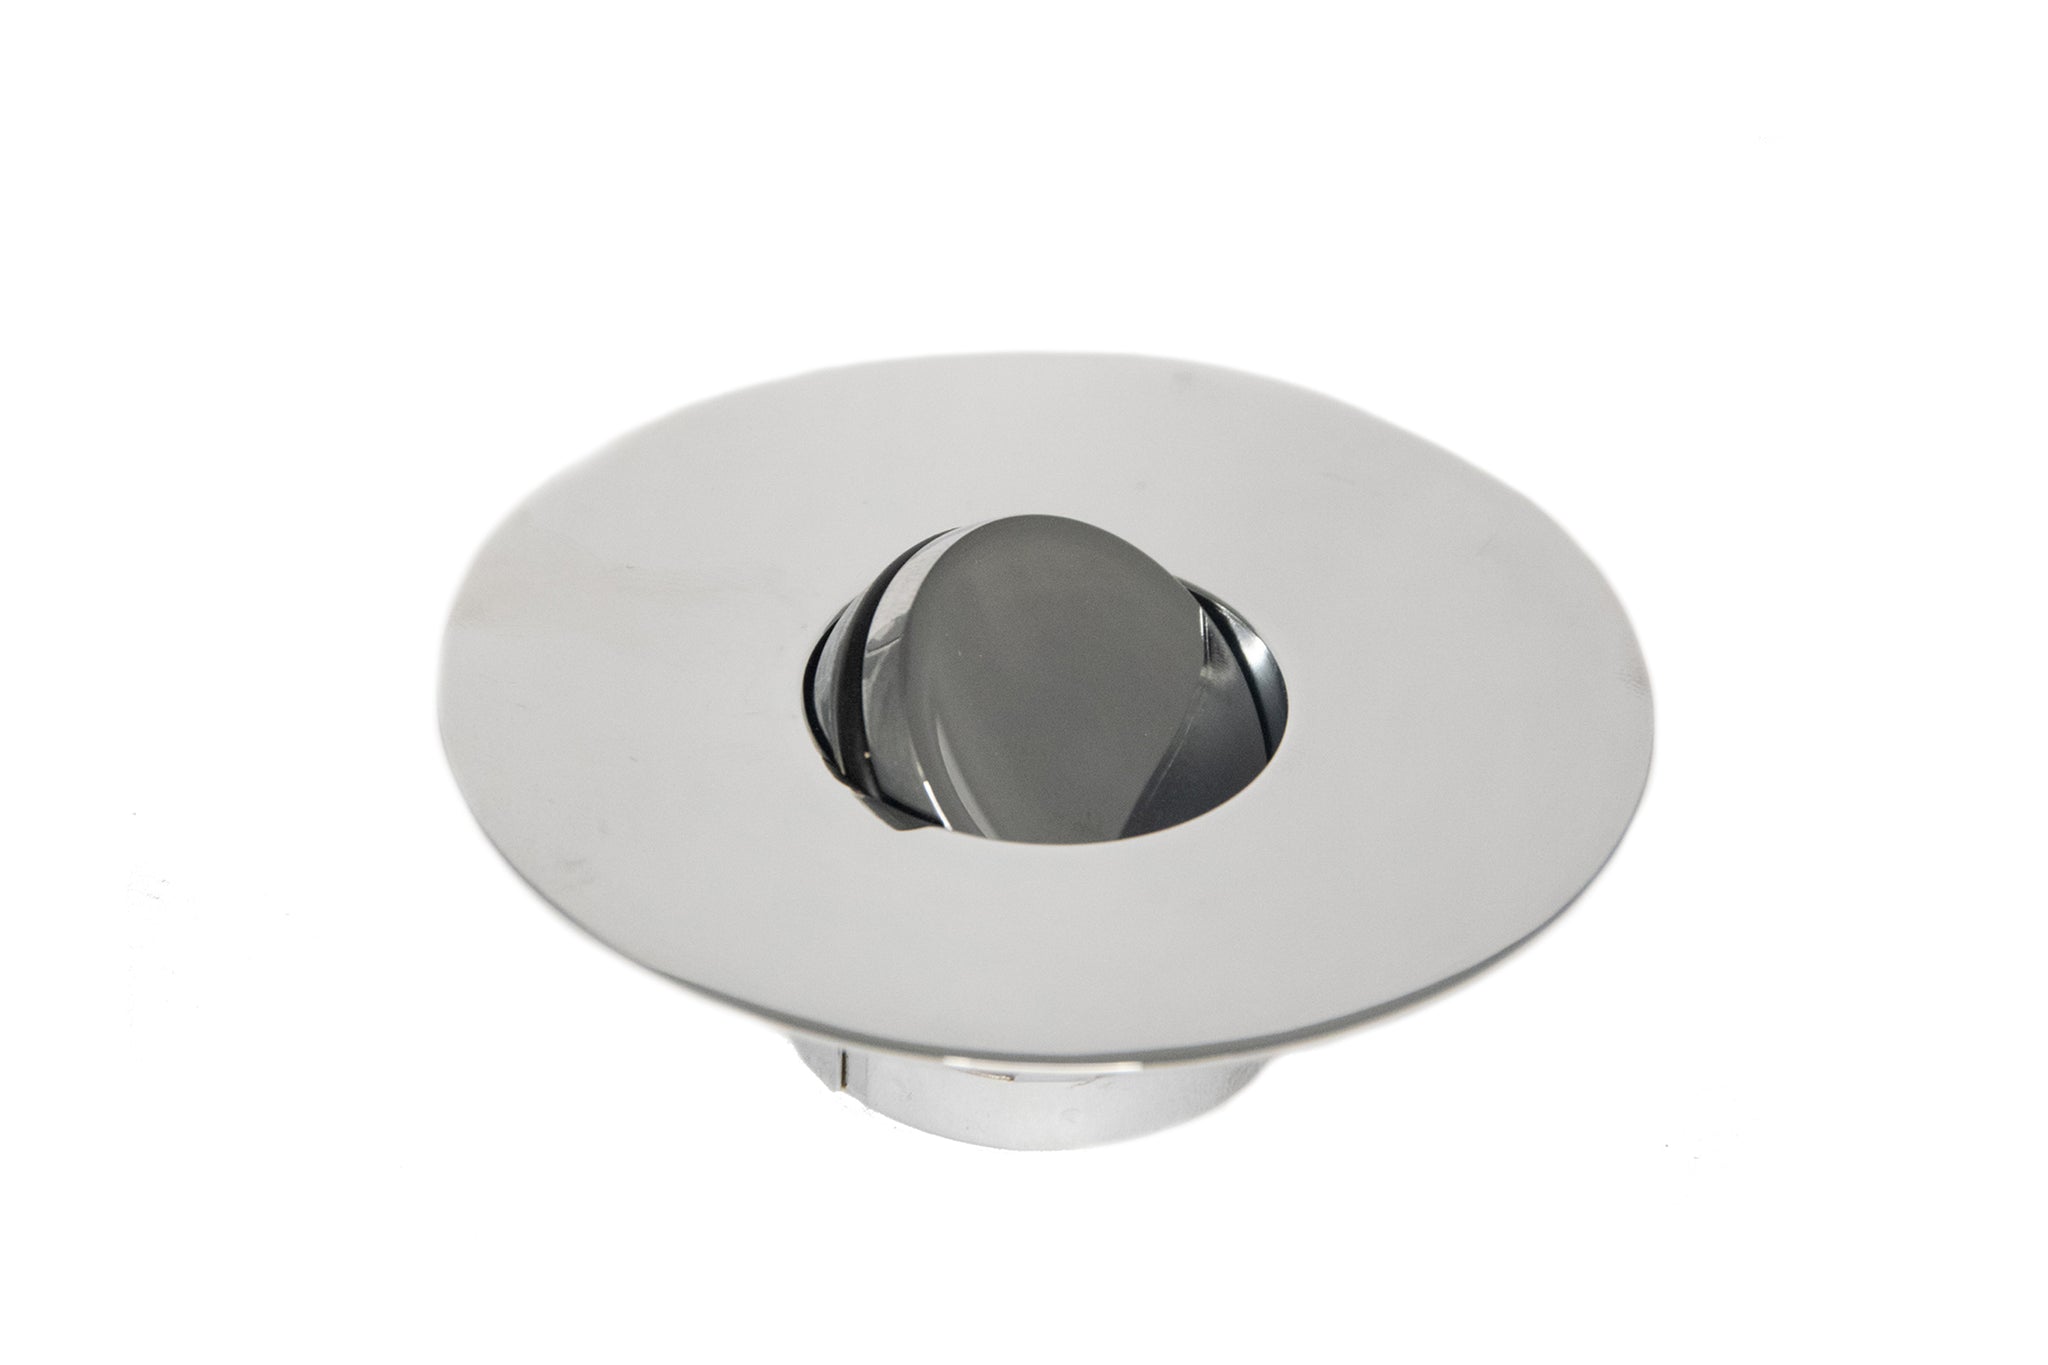 Small Non-Threaded Bathtub Flip-Top Drain Stopper with Snap-In Flange